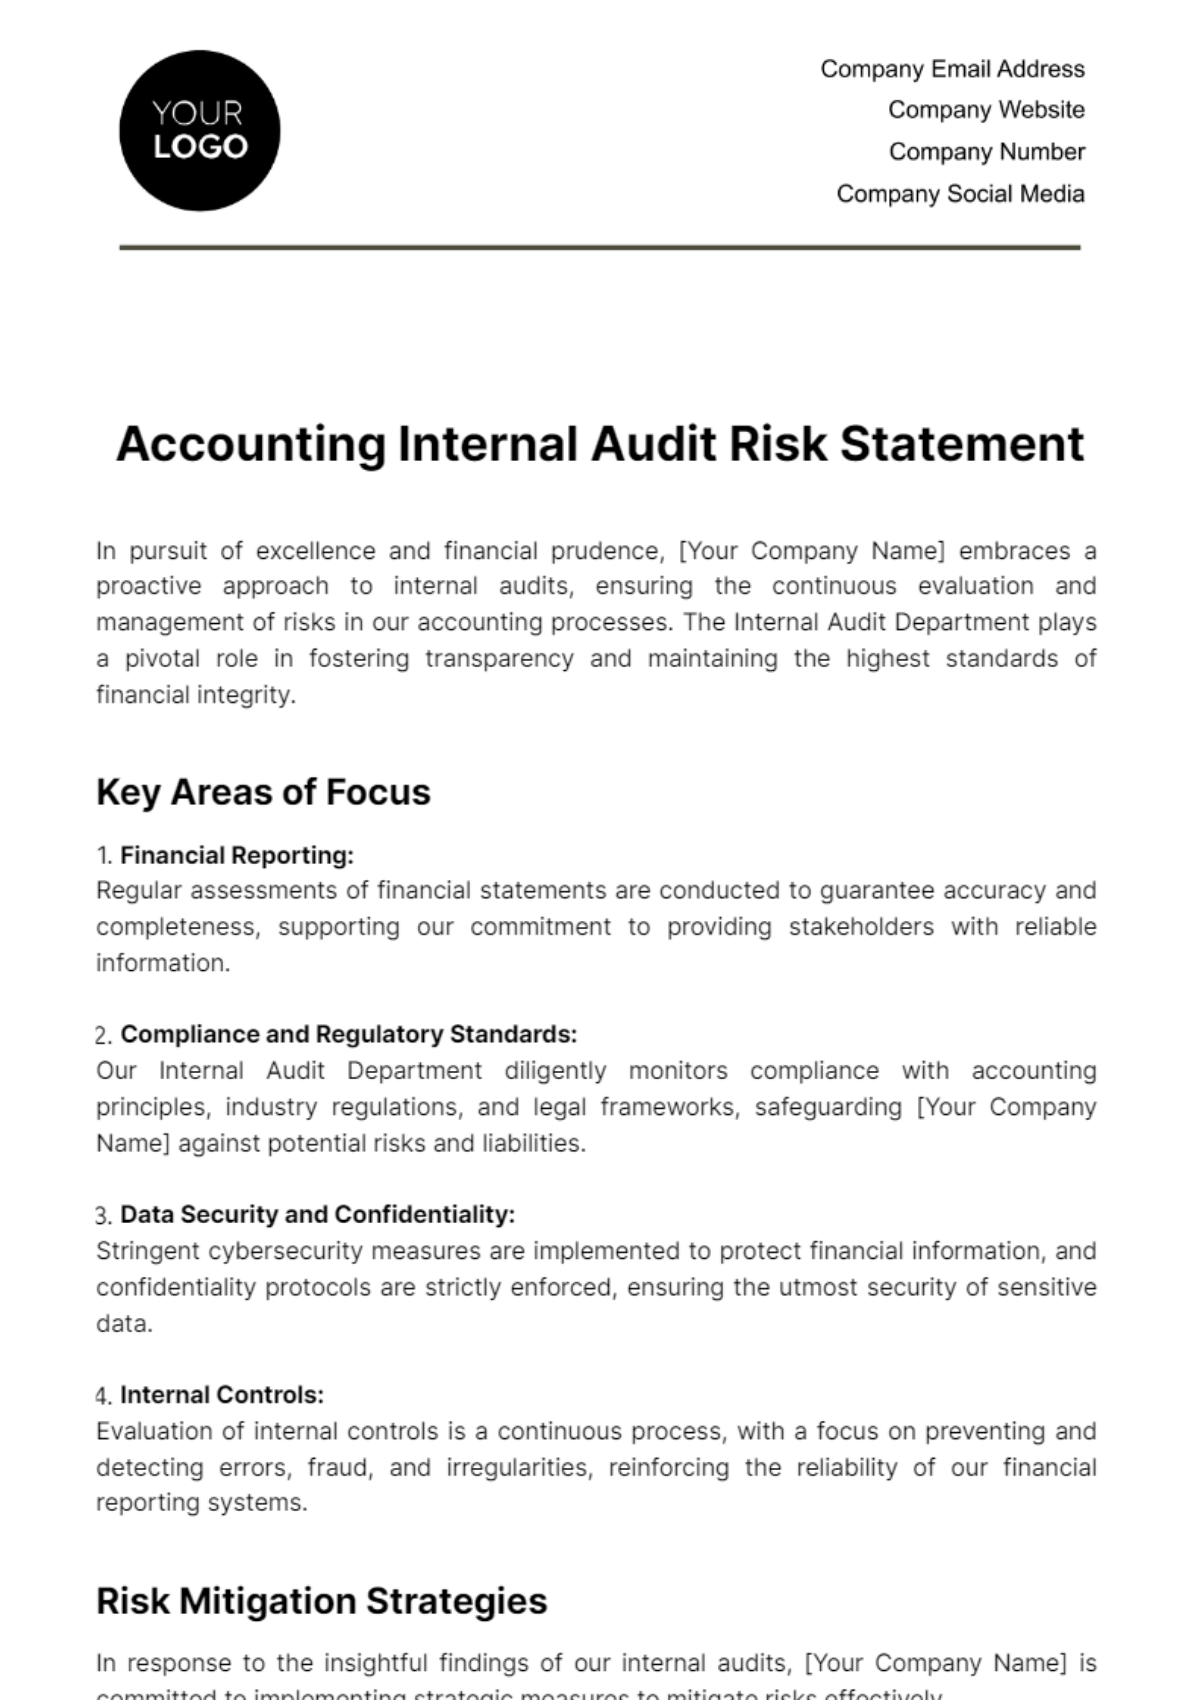 Free Accounting Internal Audit Risk Statement Template